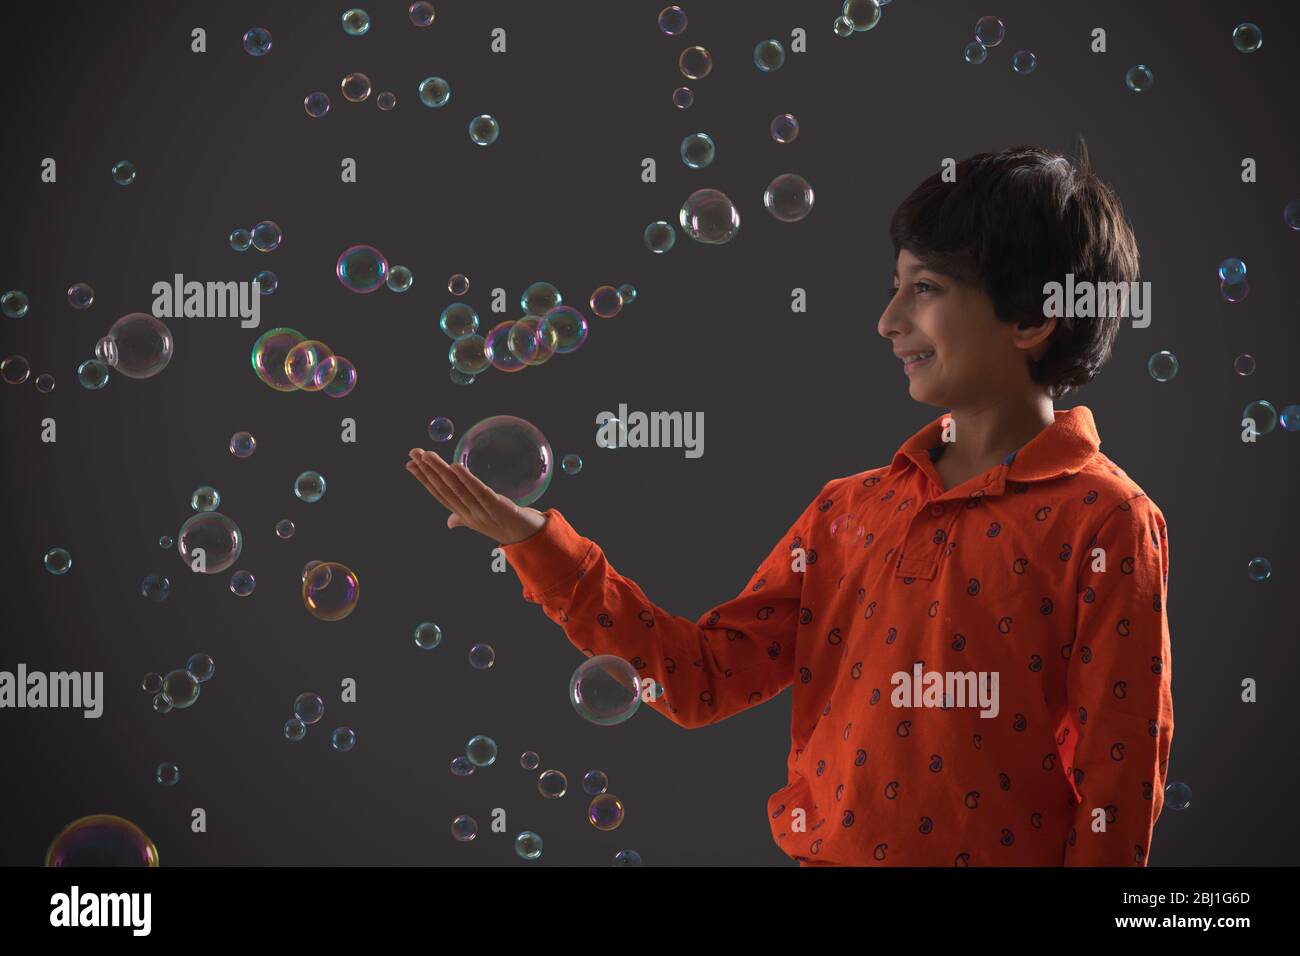 portrait of a young boy holding a bubble in her hand Stock Photo